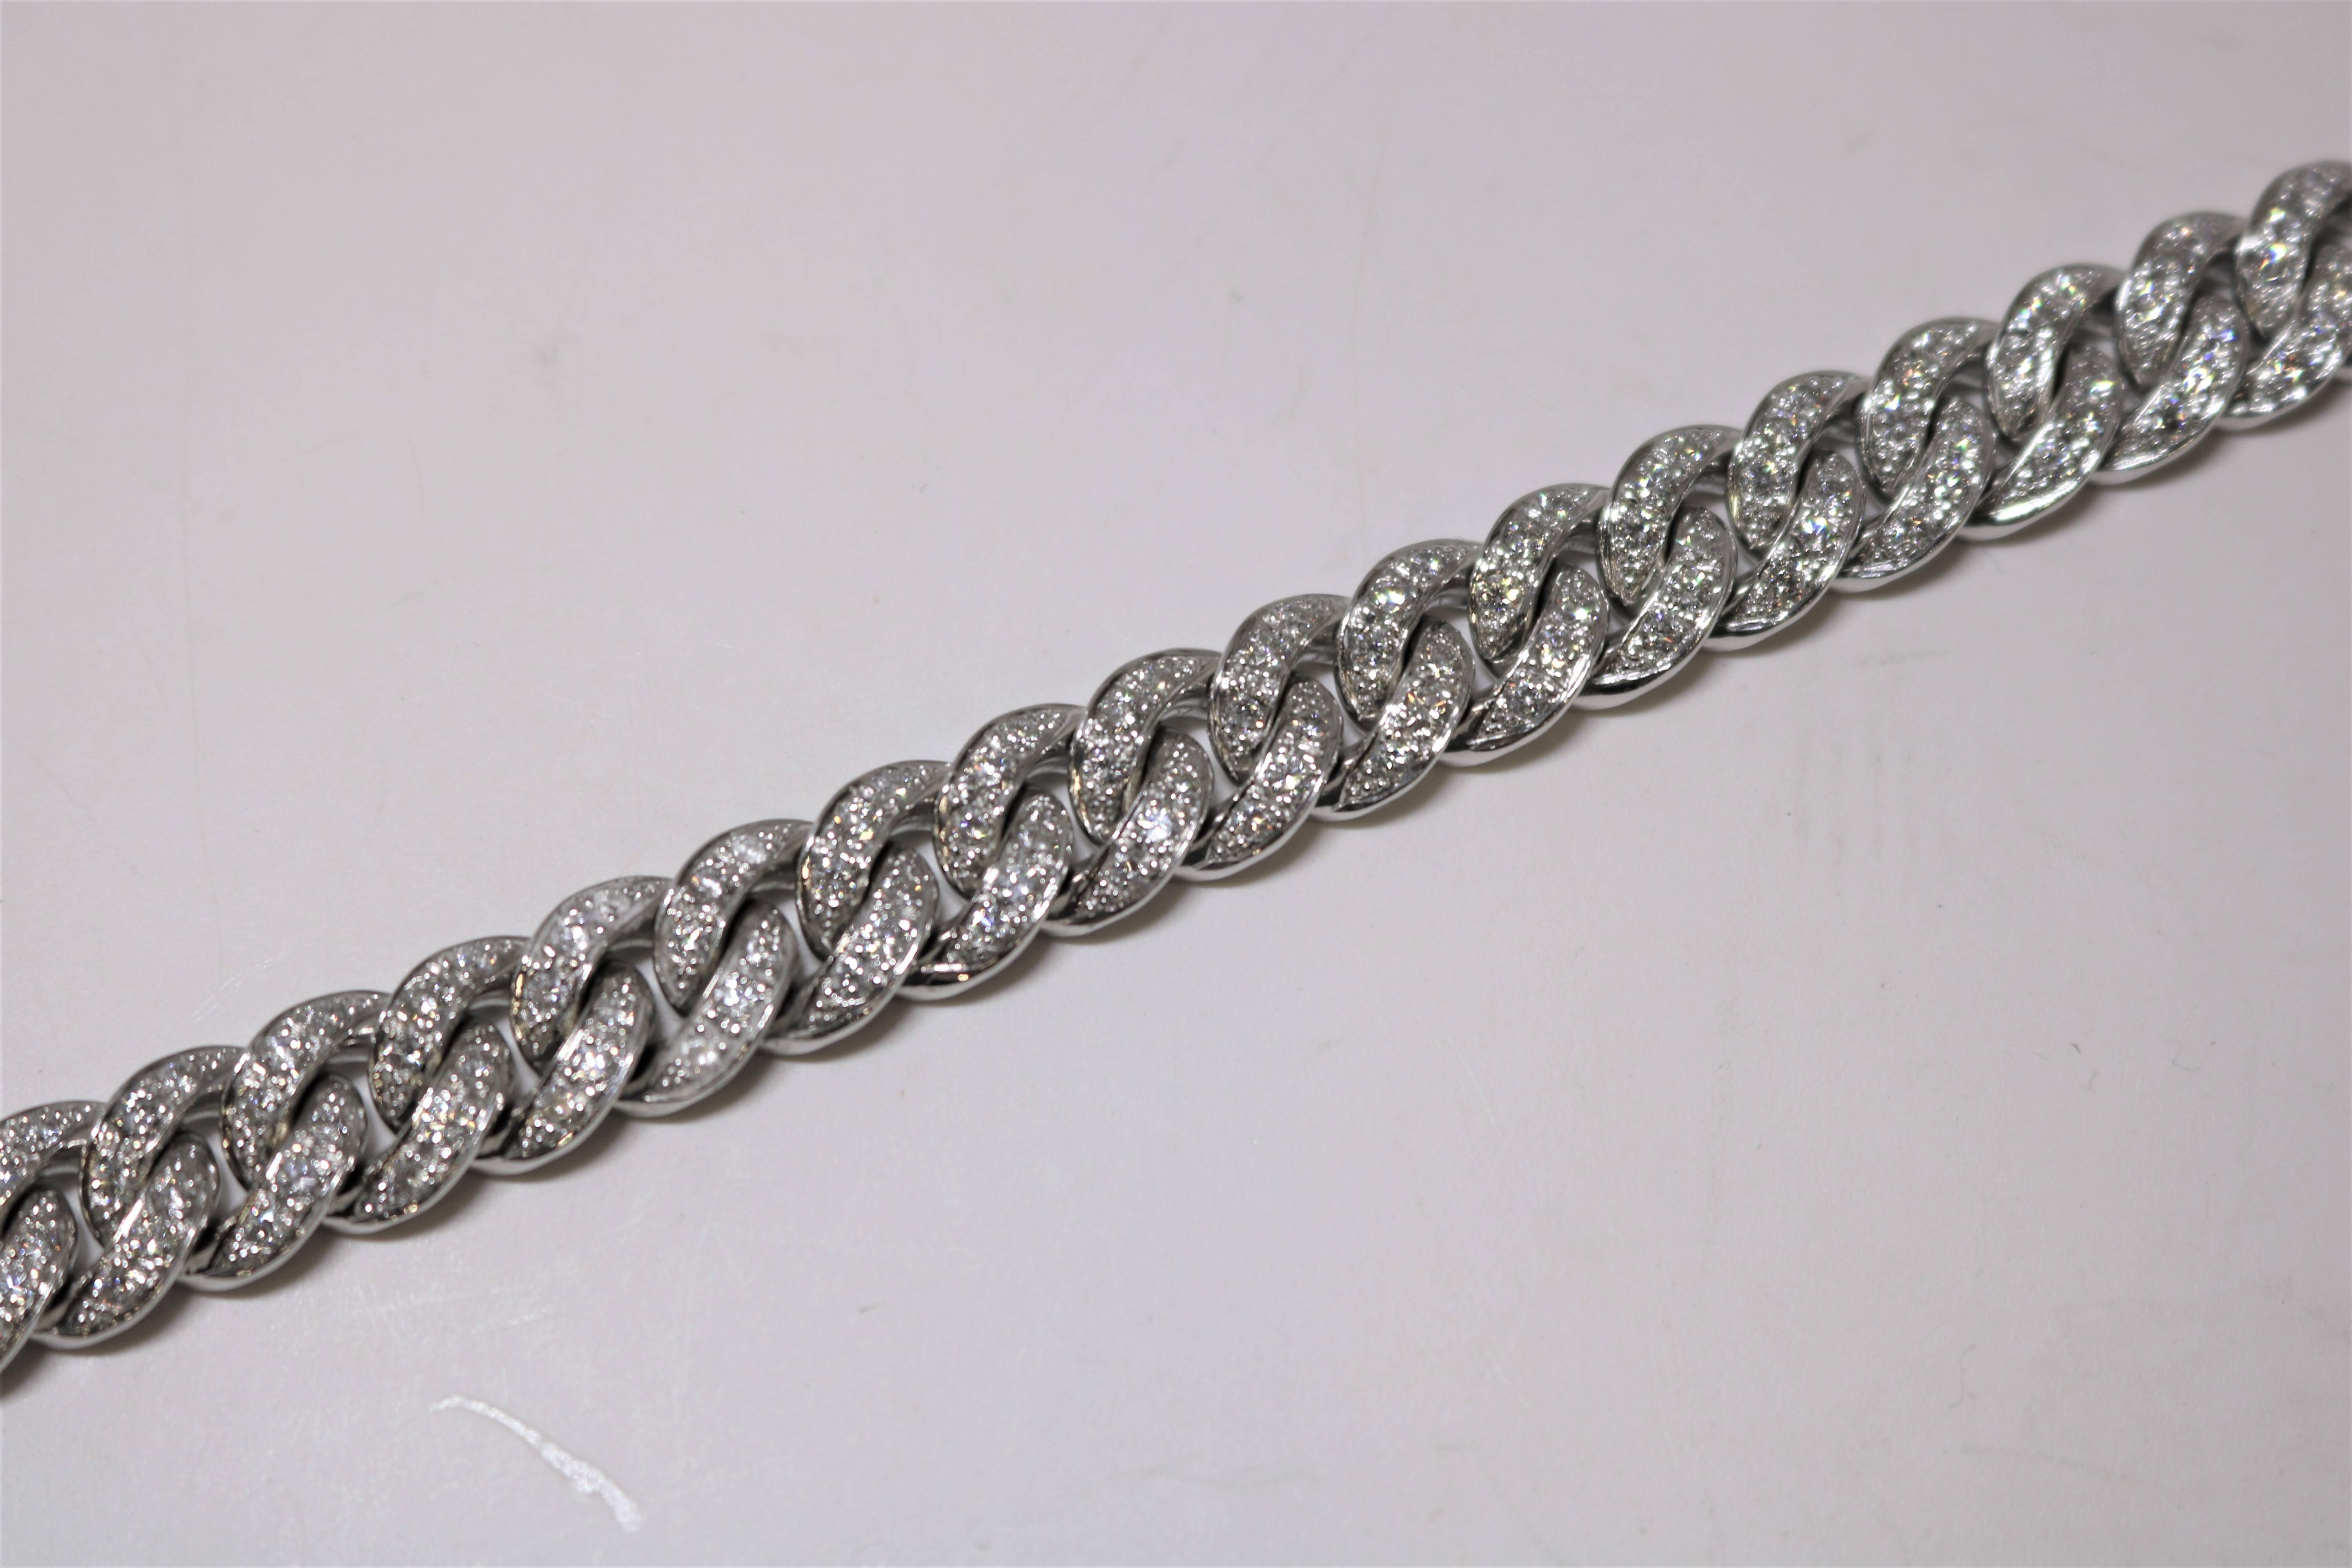 This bracelet is in 18k white gold containing diamonds weighing 4.45 cts. 